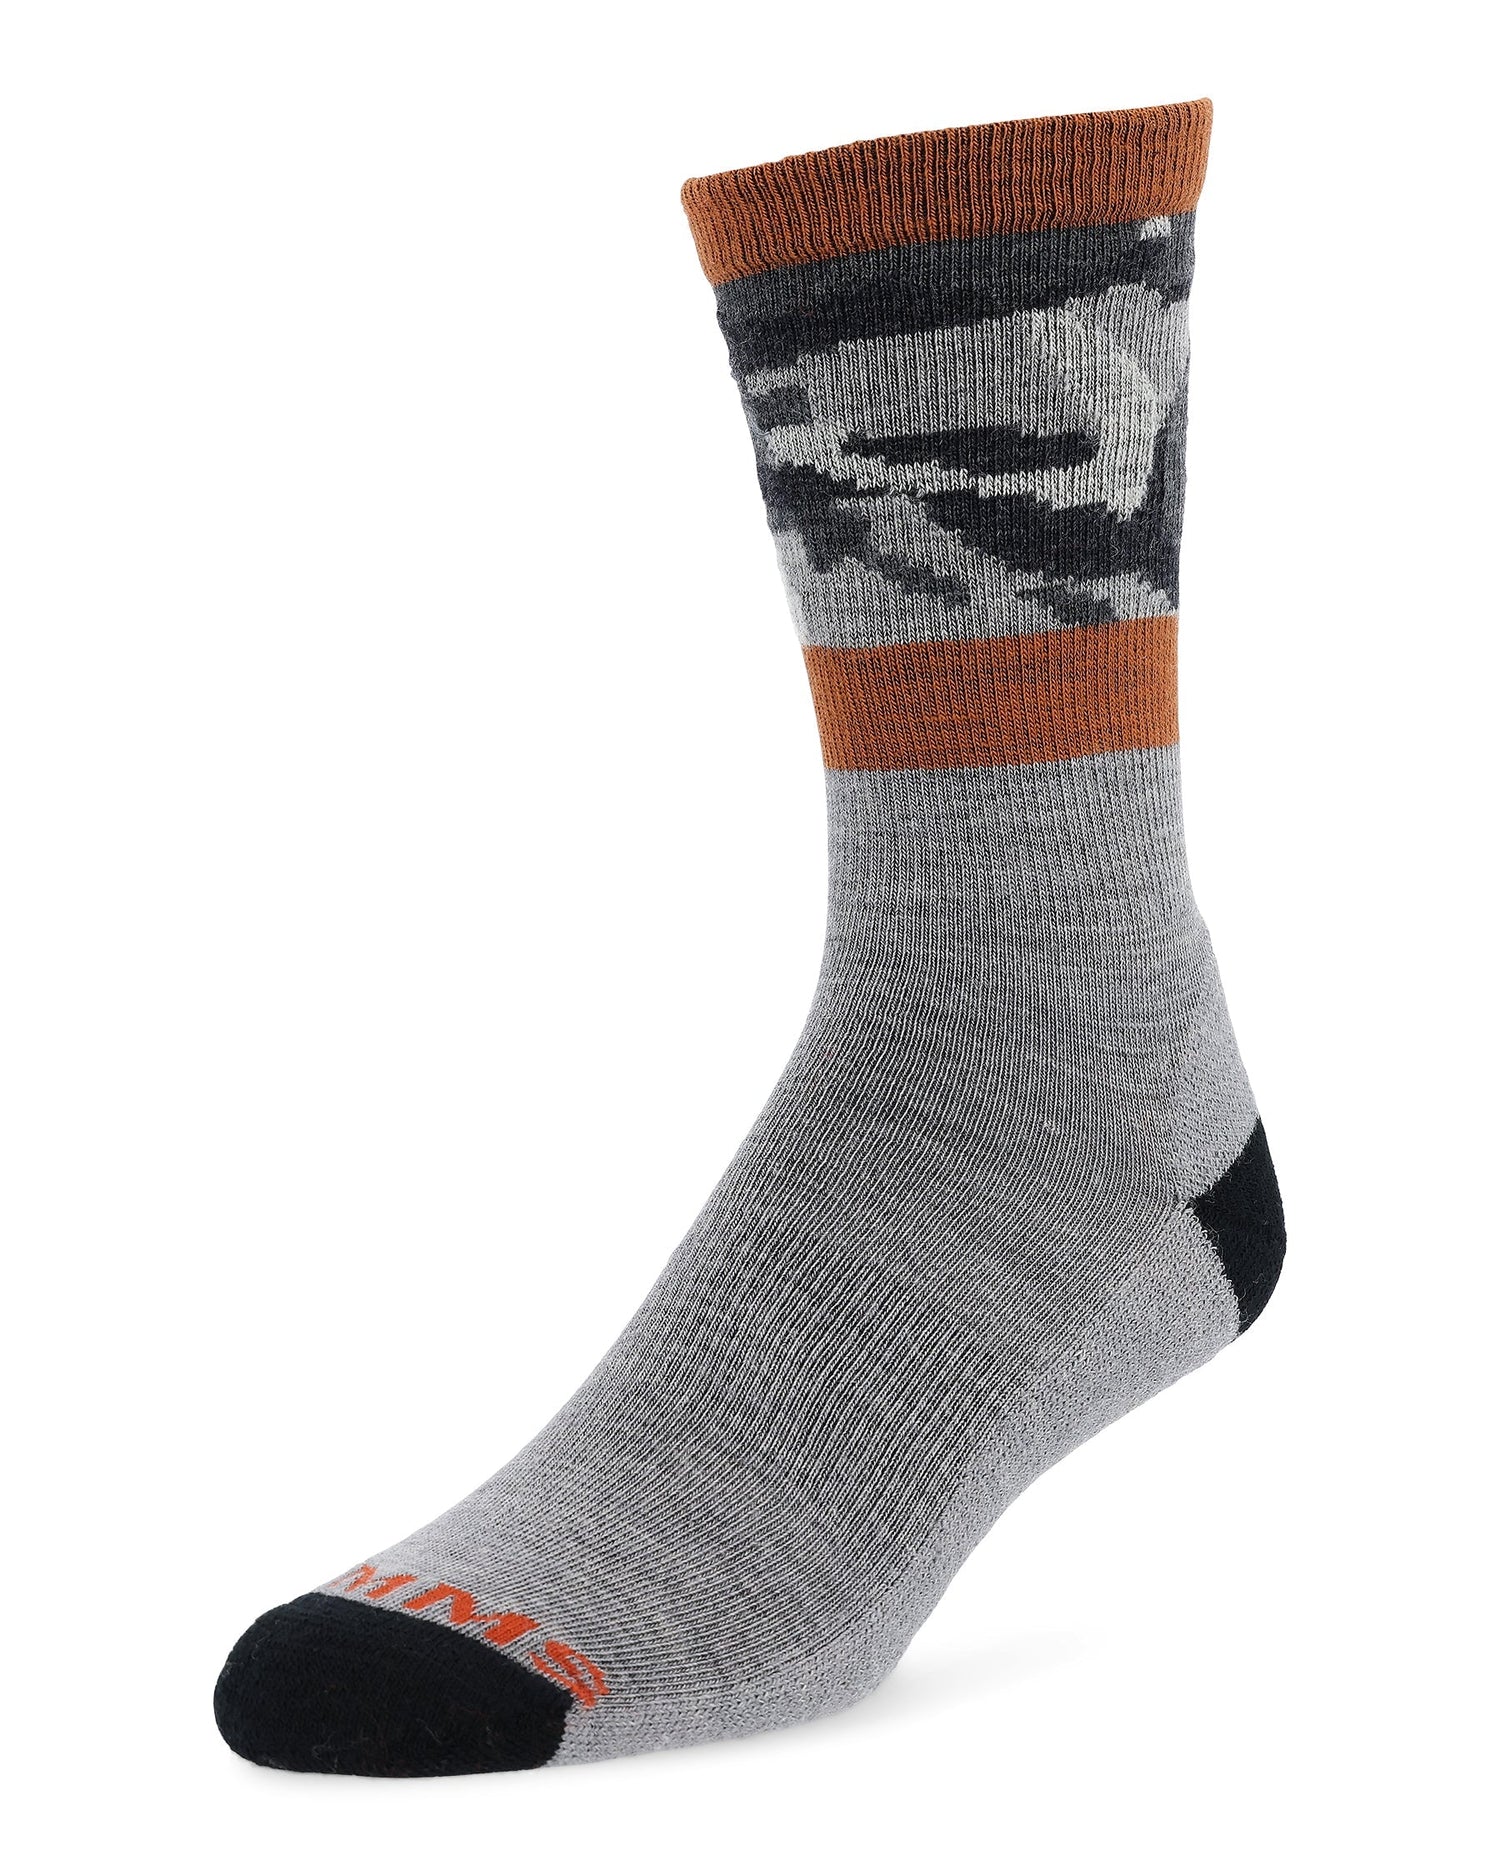 M'S DAILY SOCK WOODLAND CAMO STEEL-on-mannequin